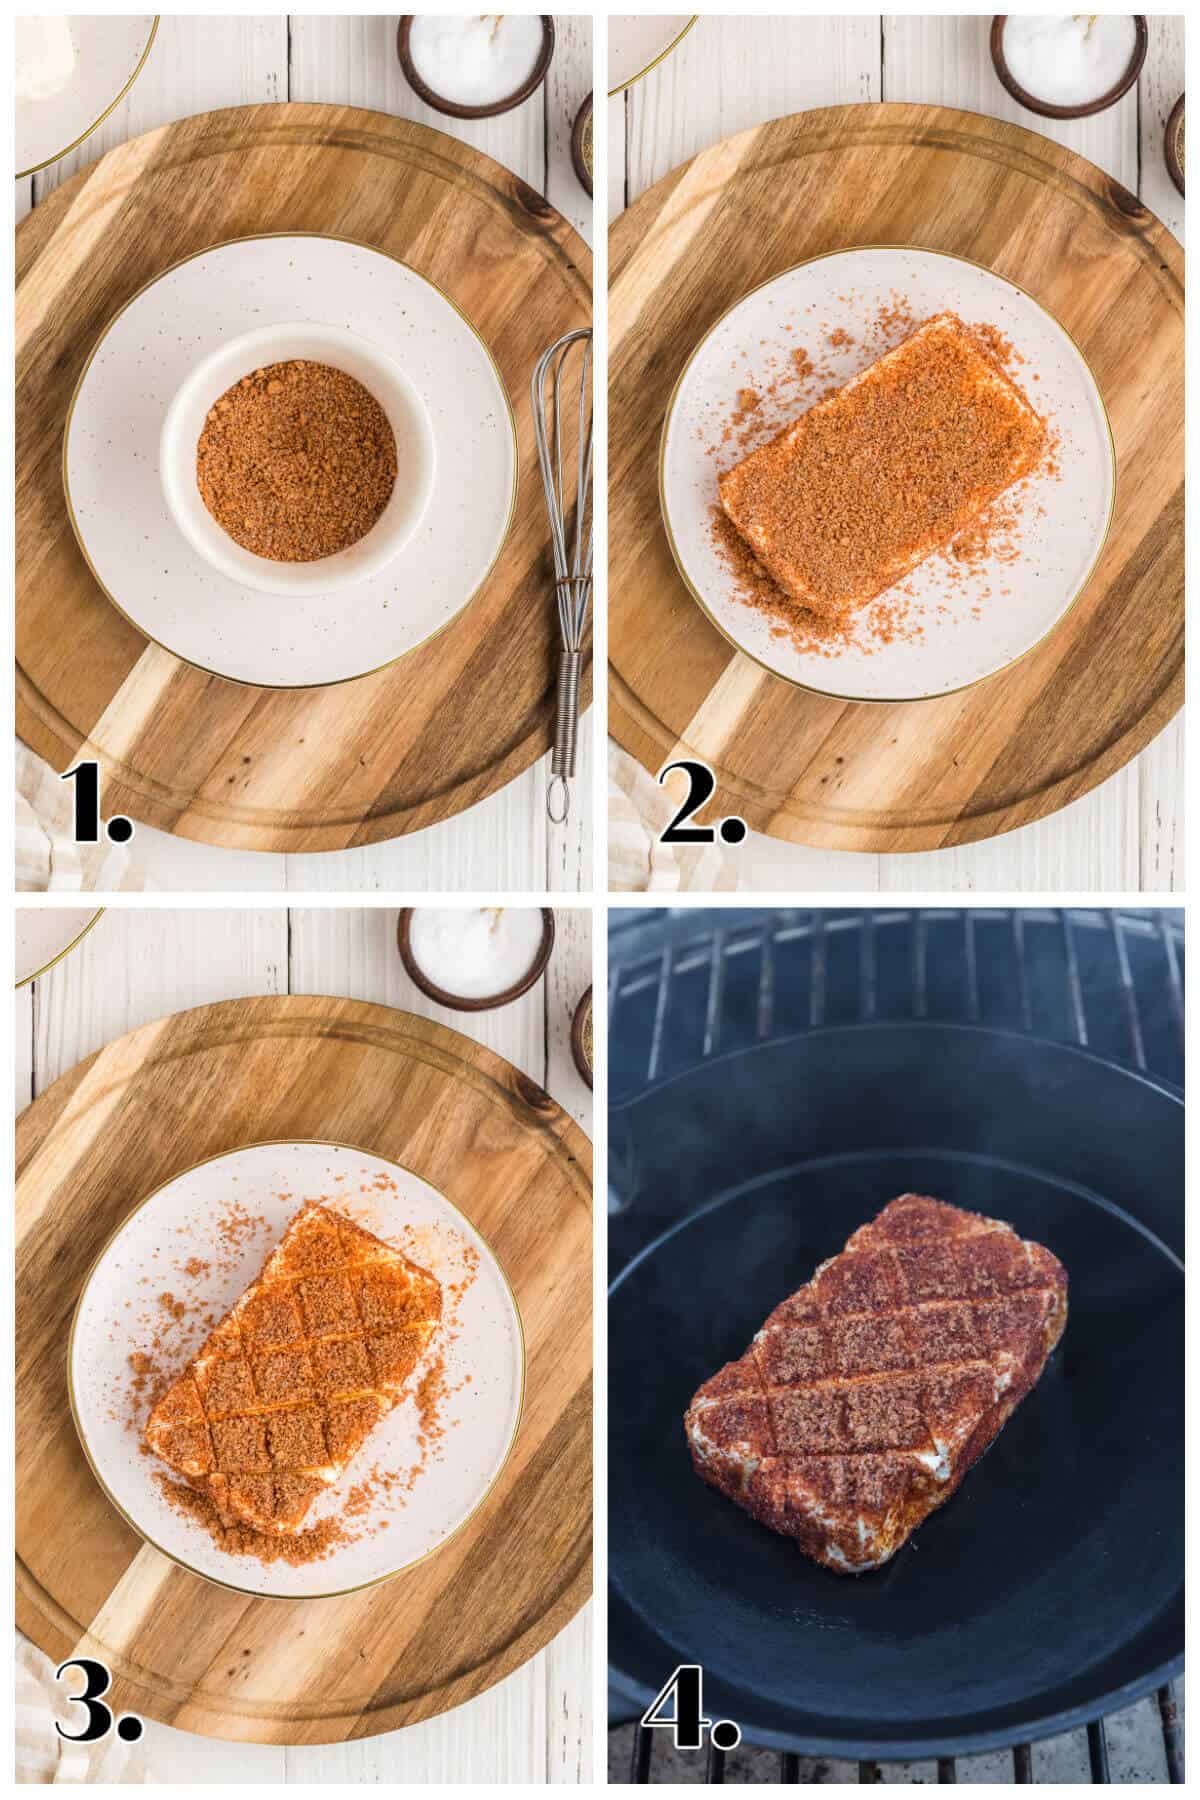 Four image collage showing the steps on how to smoke cream cheese. Make the dry rub, coat the cheese, cut cross hatch pattern, and put in the smoker.